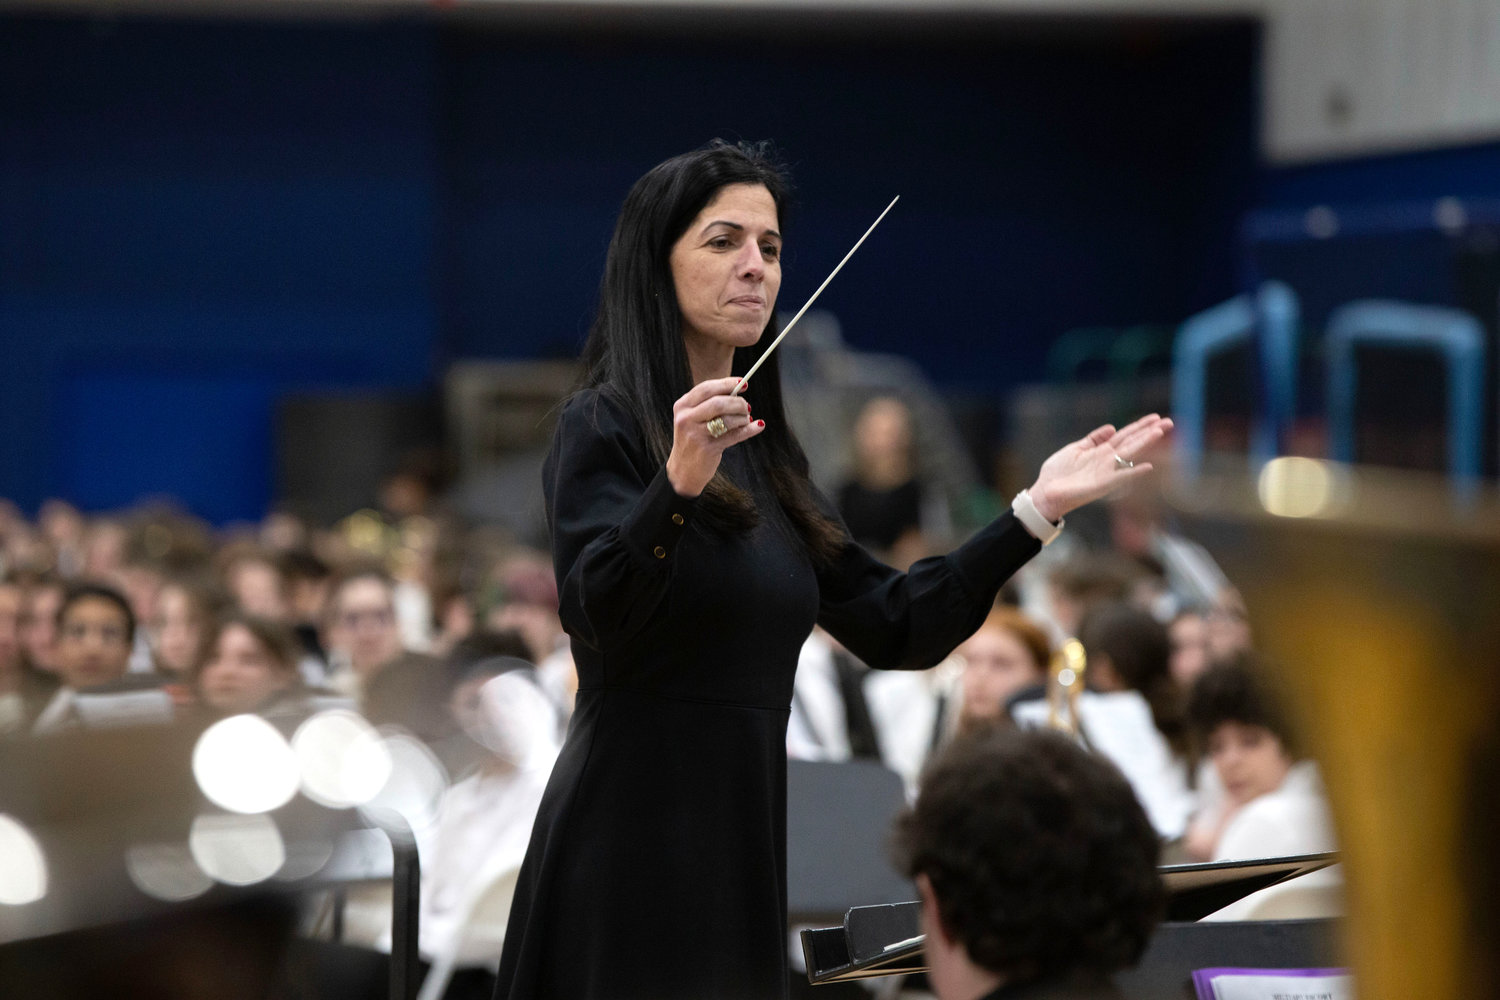 Superintendent Ana C. Riley performed as a special guest conductor for the high school band in Brian Balmages’ “Among the Clouds.”